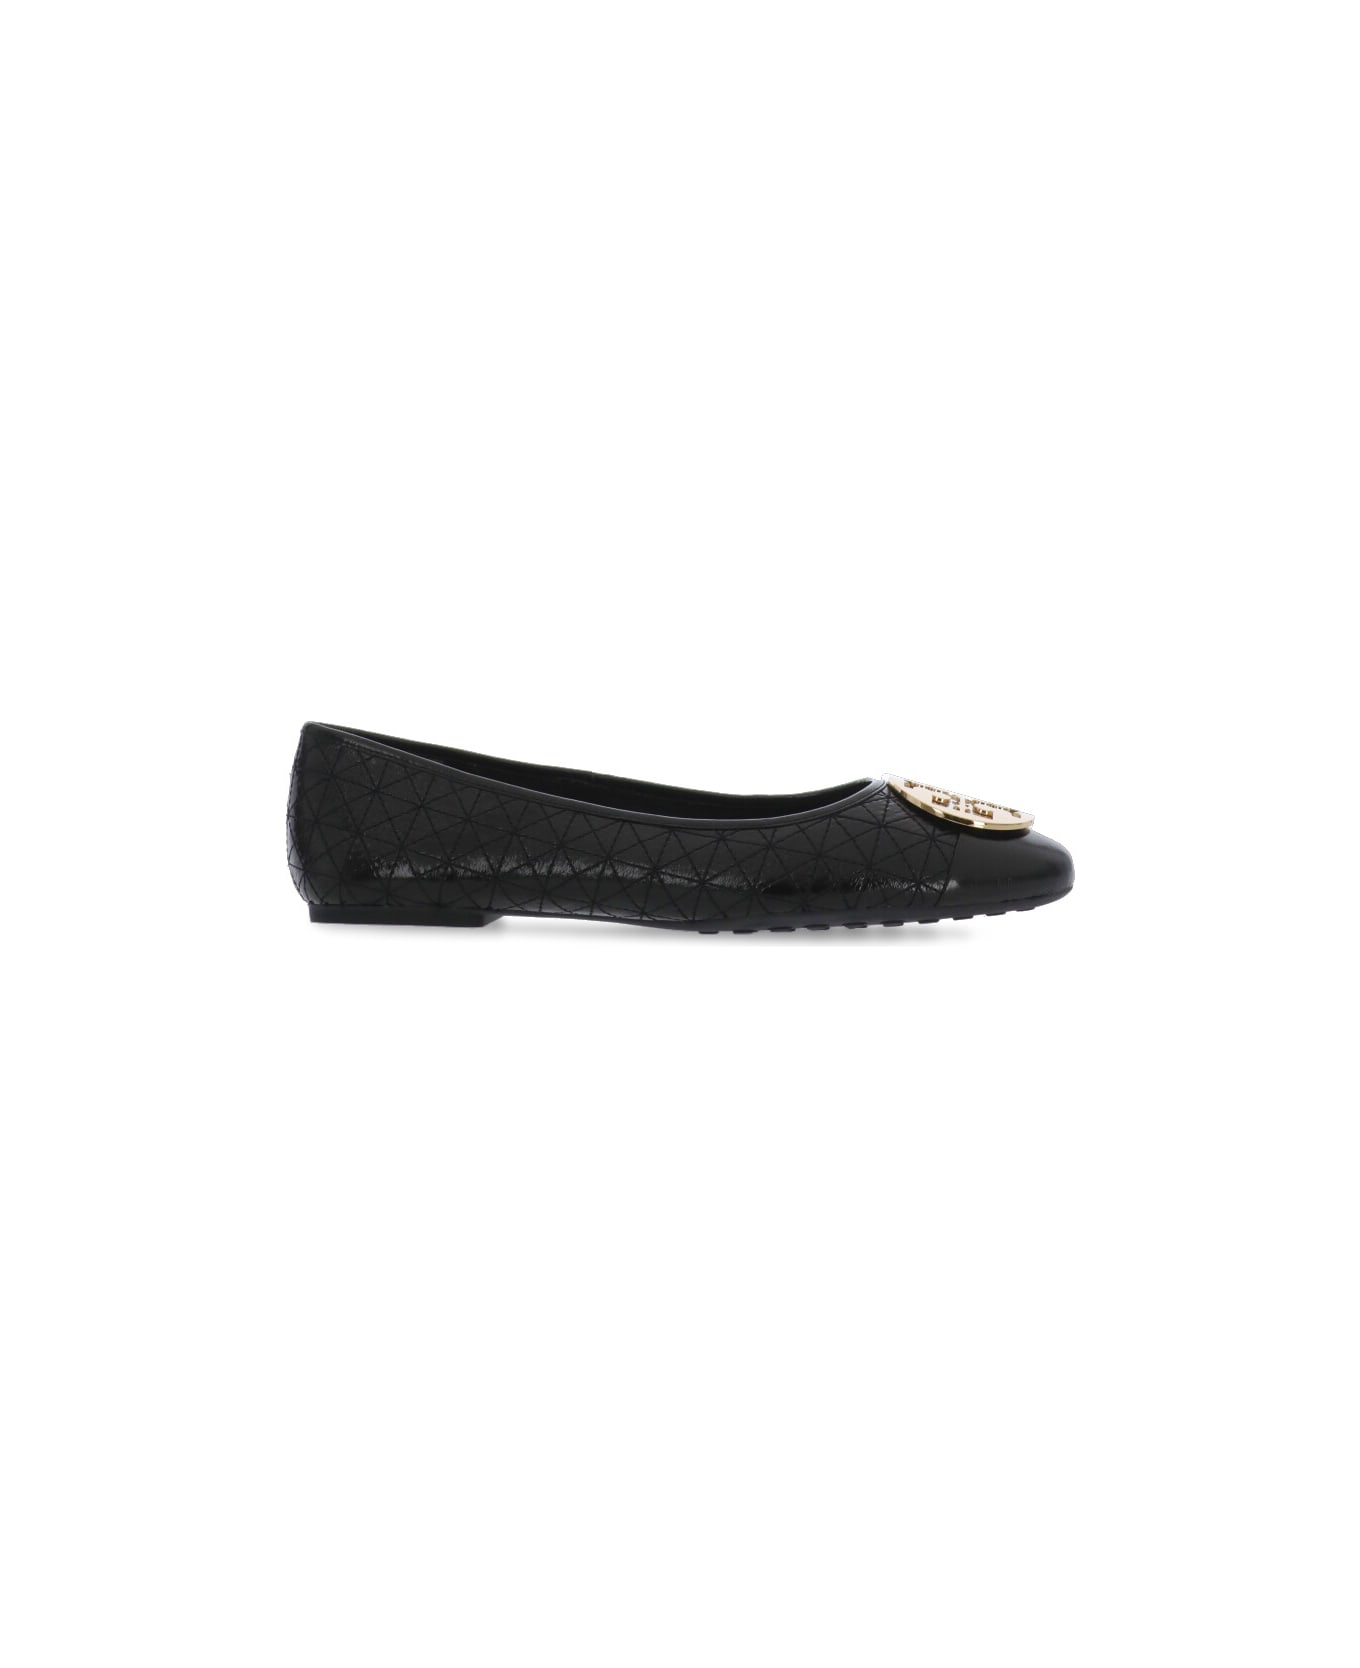 Tory Burch Claire Quilted Ballets - Black フラットシューズ